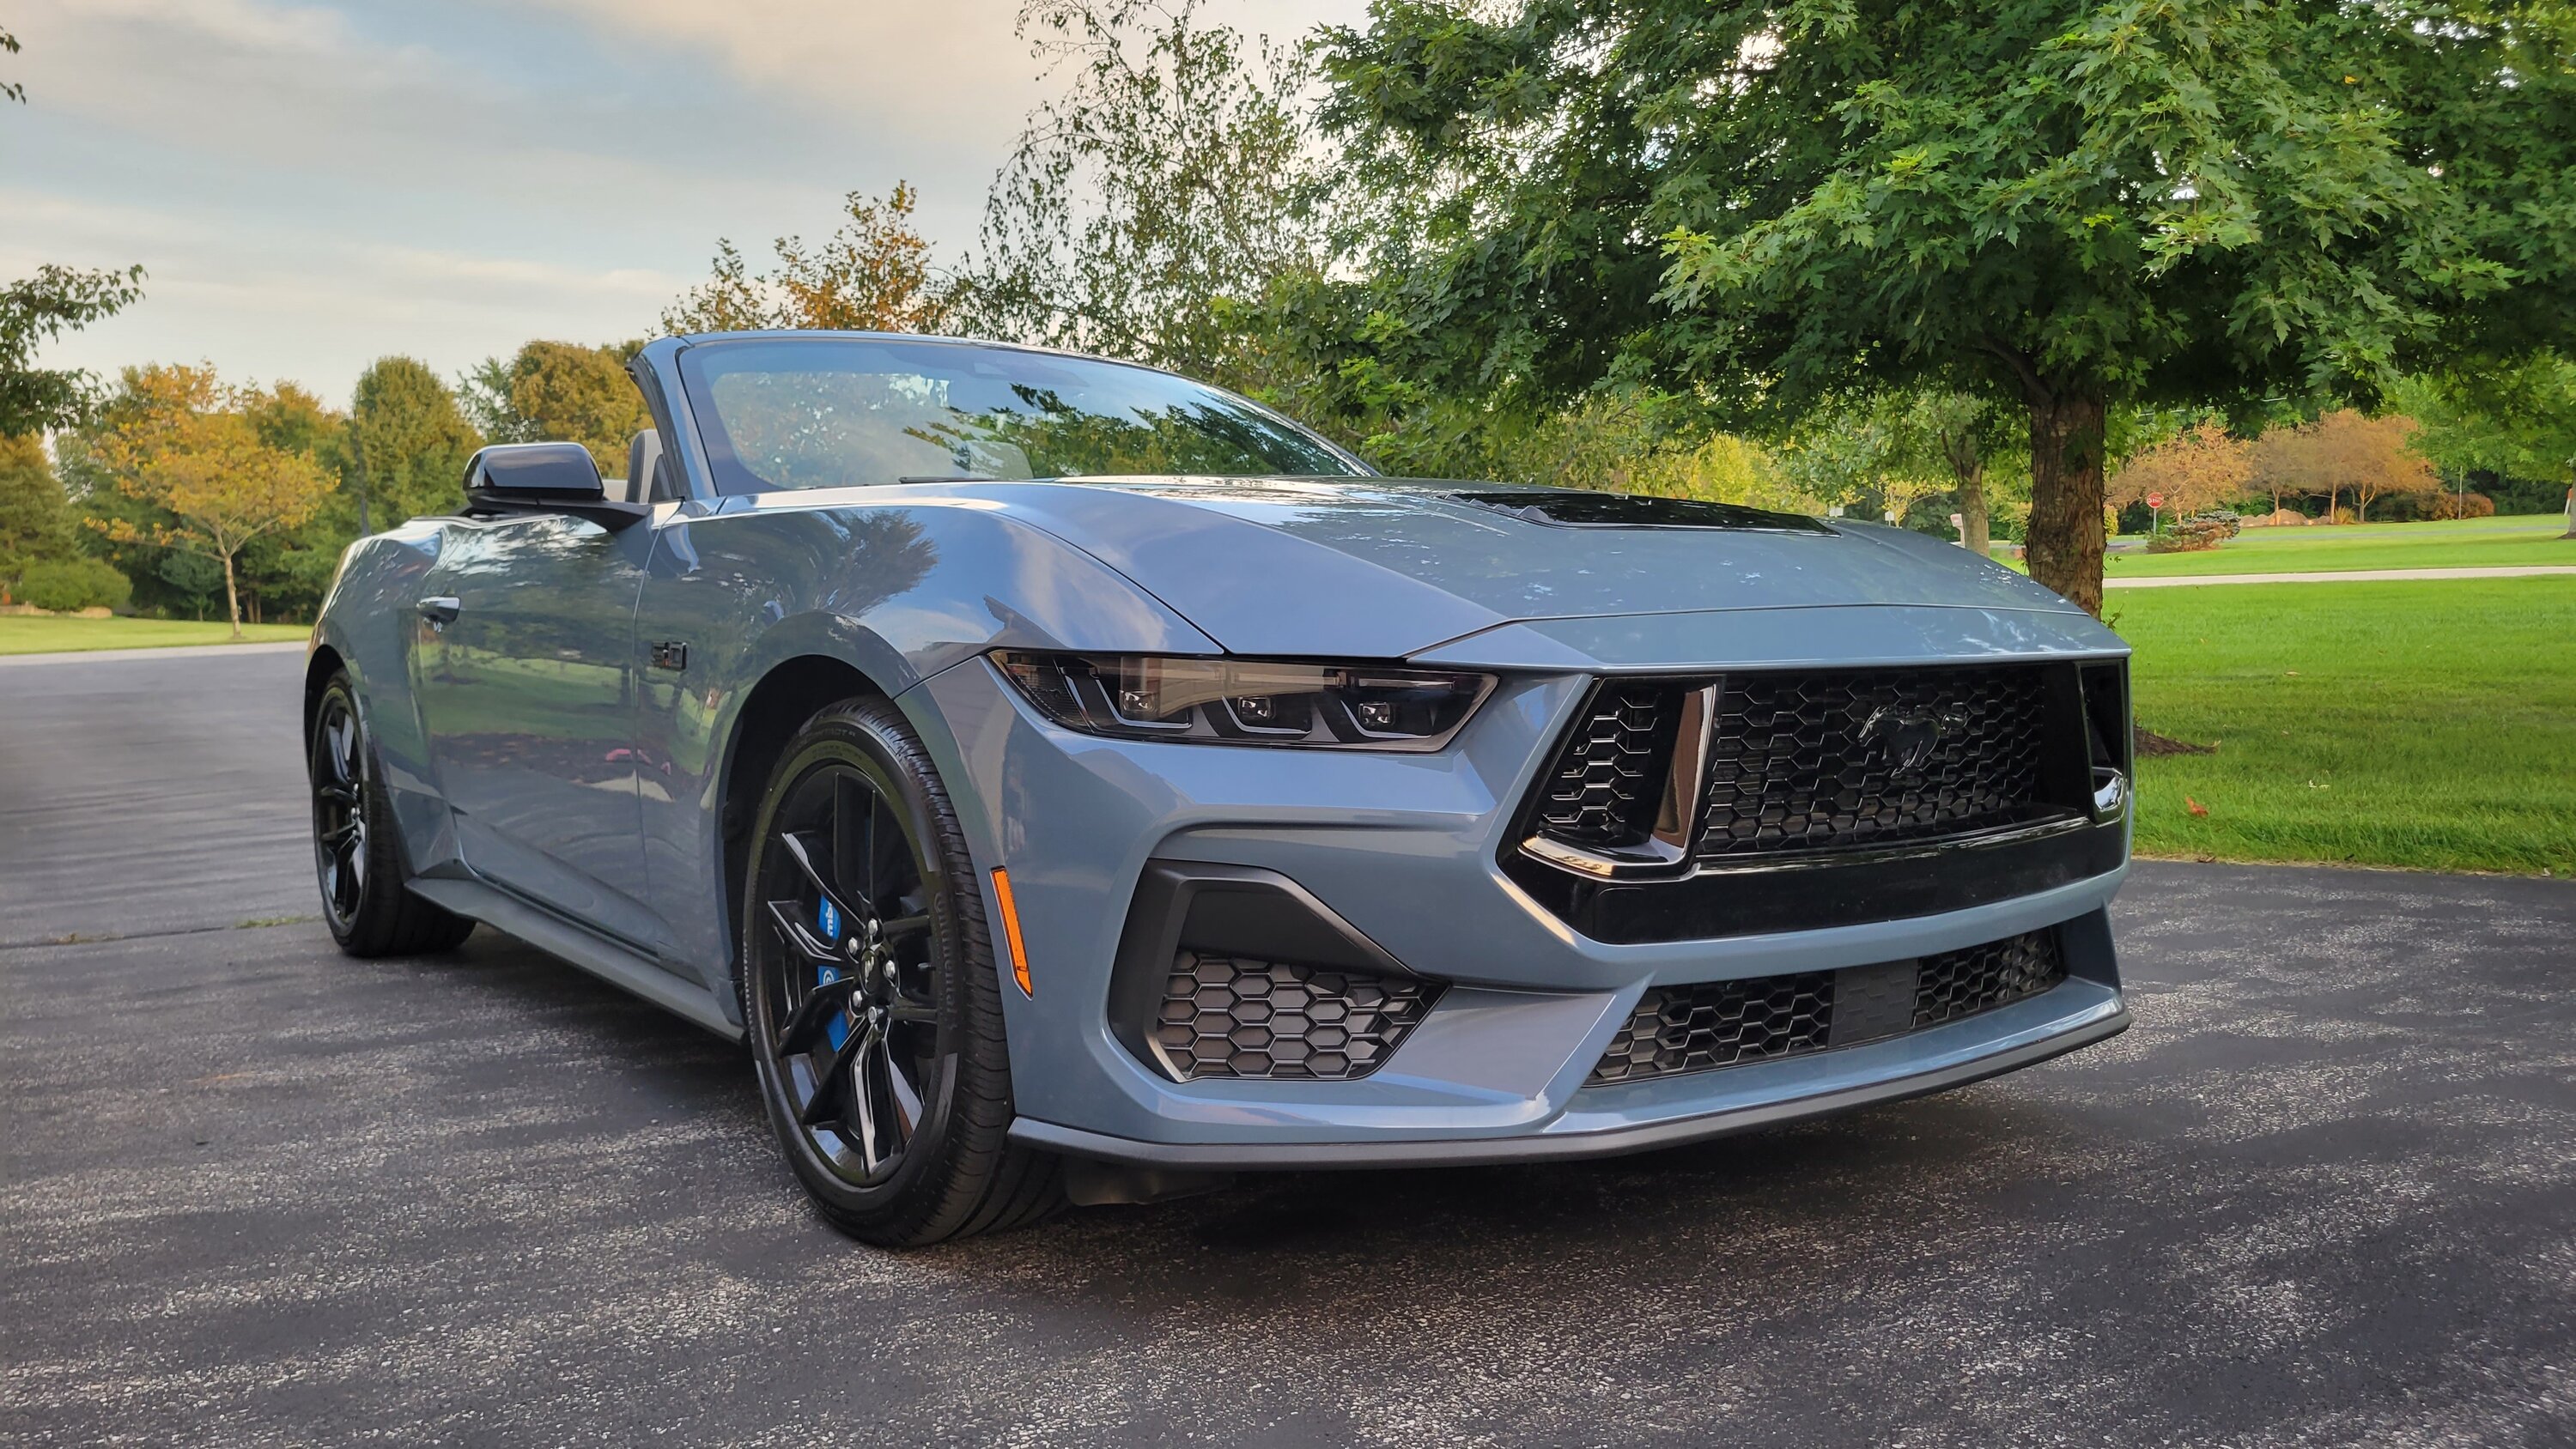 S650 Mustang BUILT & SHIPPED !! Tracker update 2023: What's your status? 20230911_192844